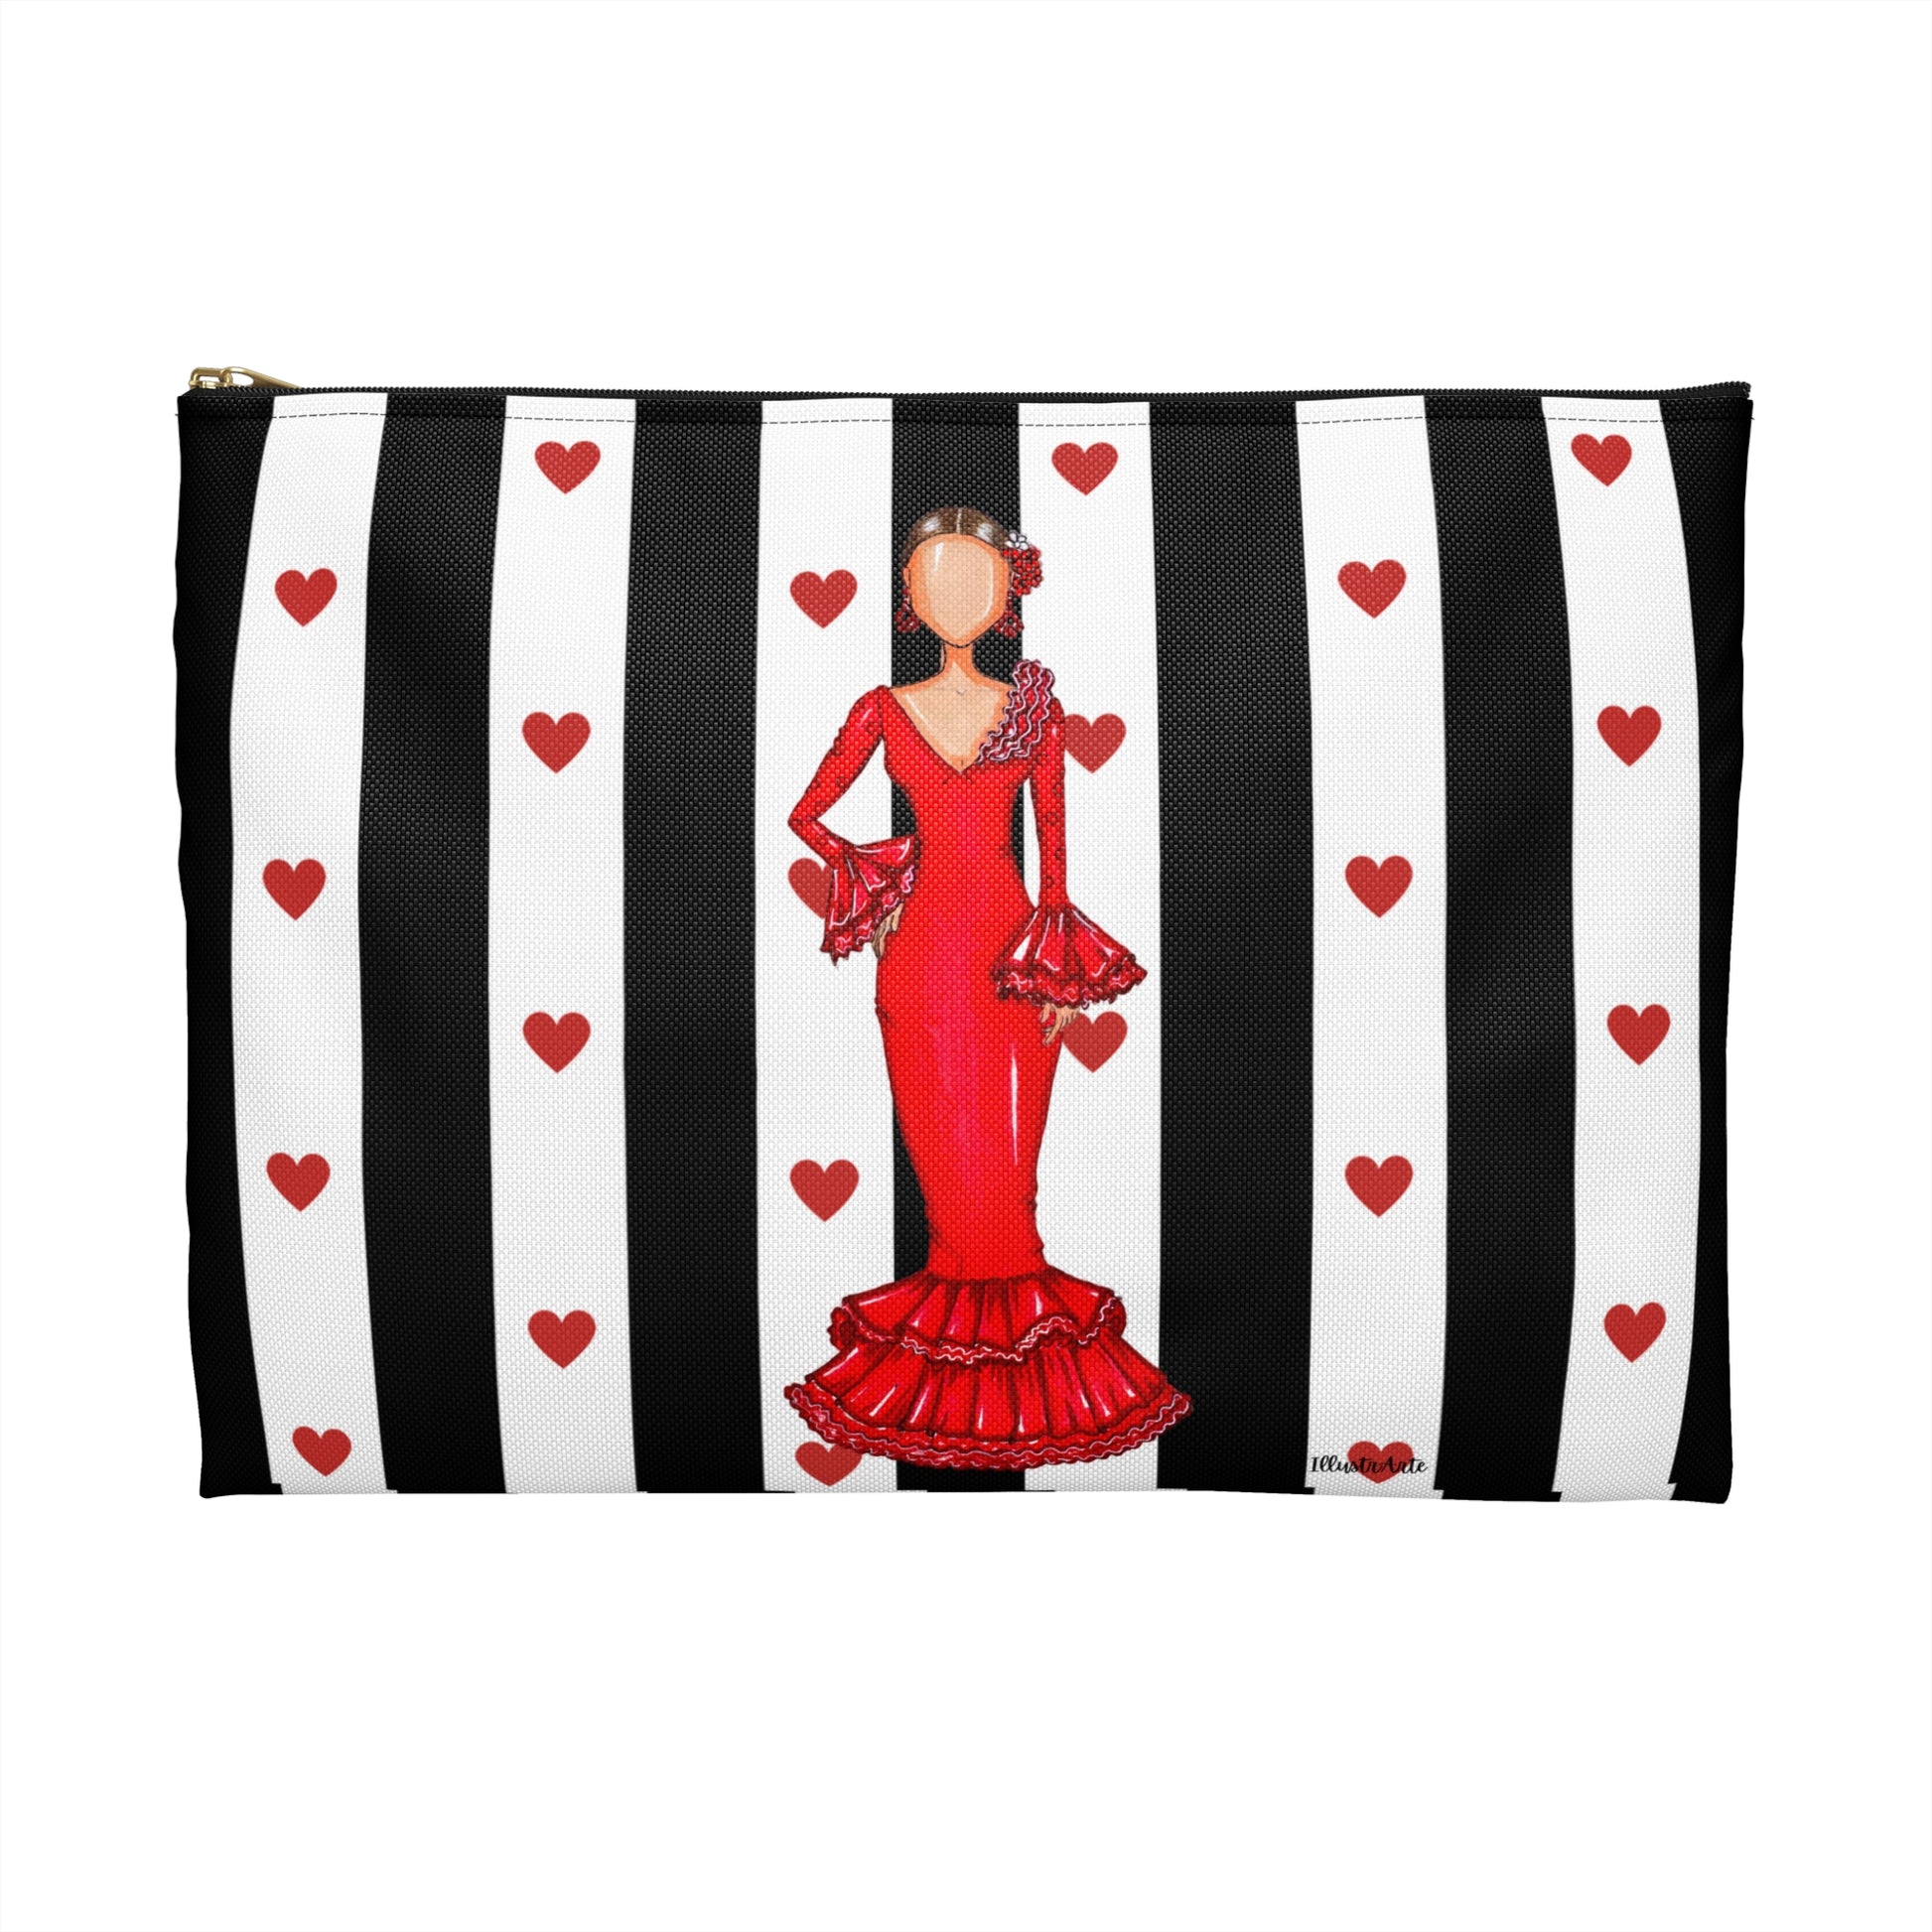 a black and white striped bag with a picture of a woman in a red dress